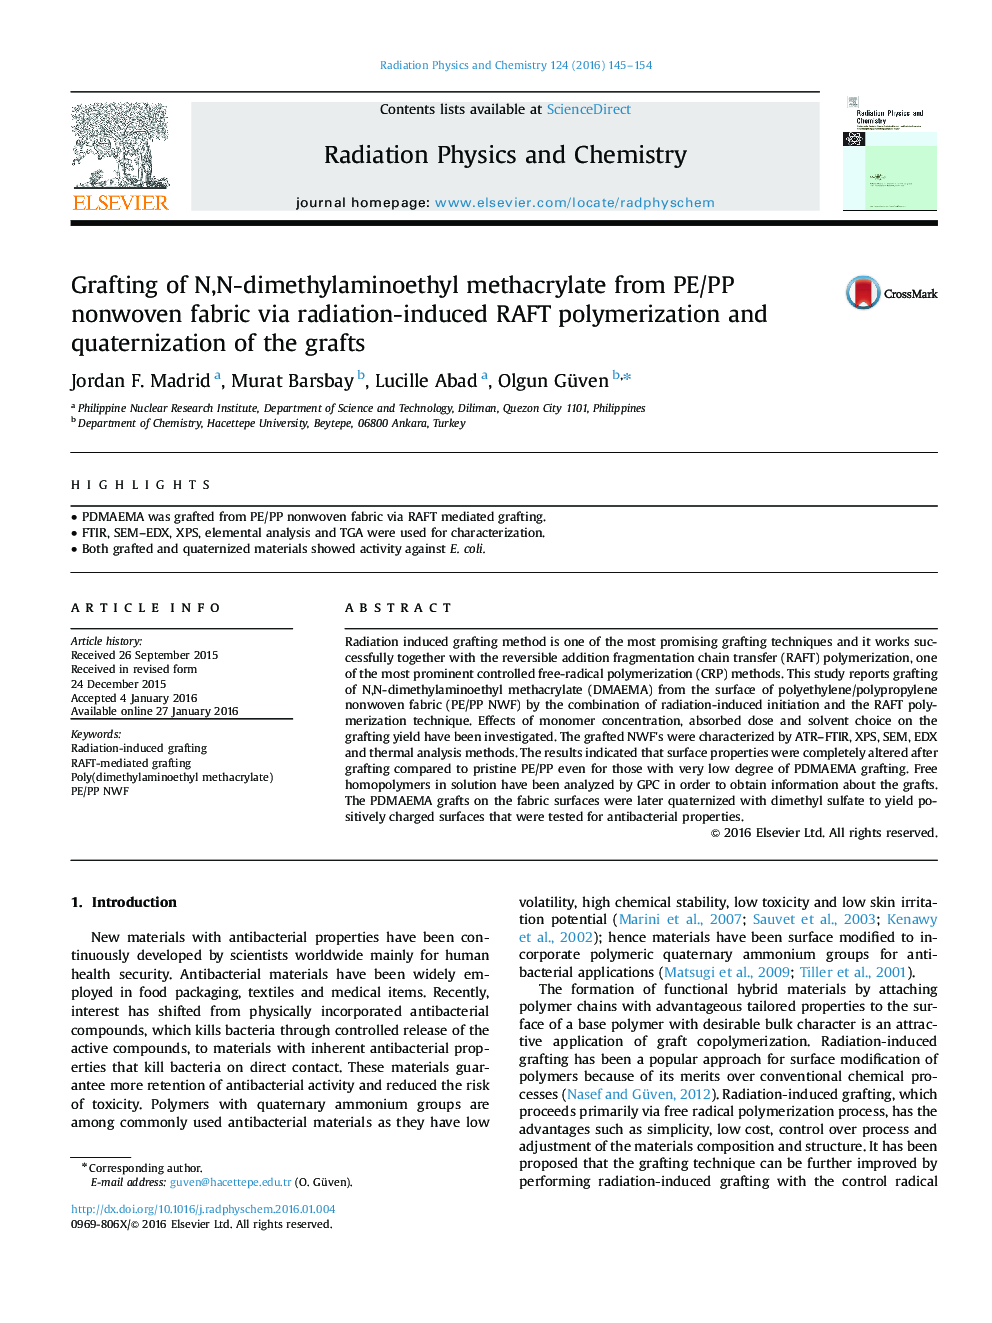 Grafting of N,N-dimethylaminoethyl methacrylate from PE/PP nonwoven fabric via radiation-induced RAFT polymerization and quaternization of the grafts